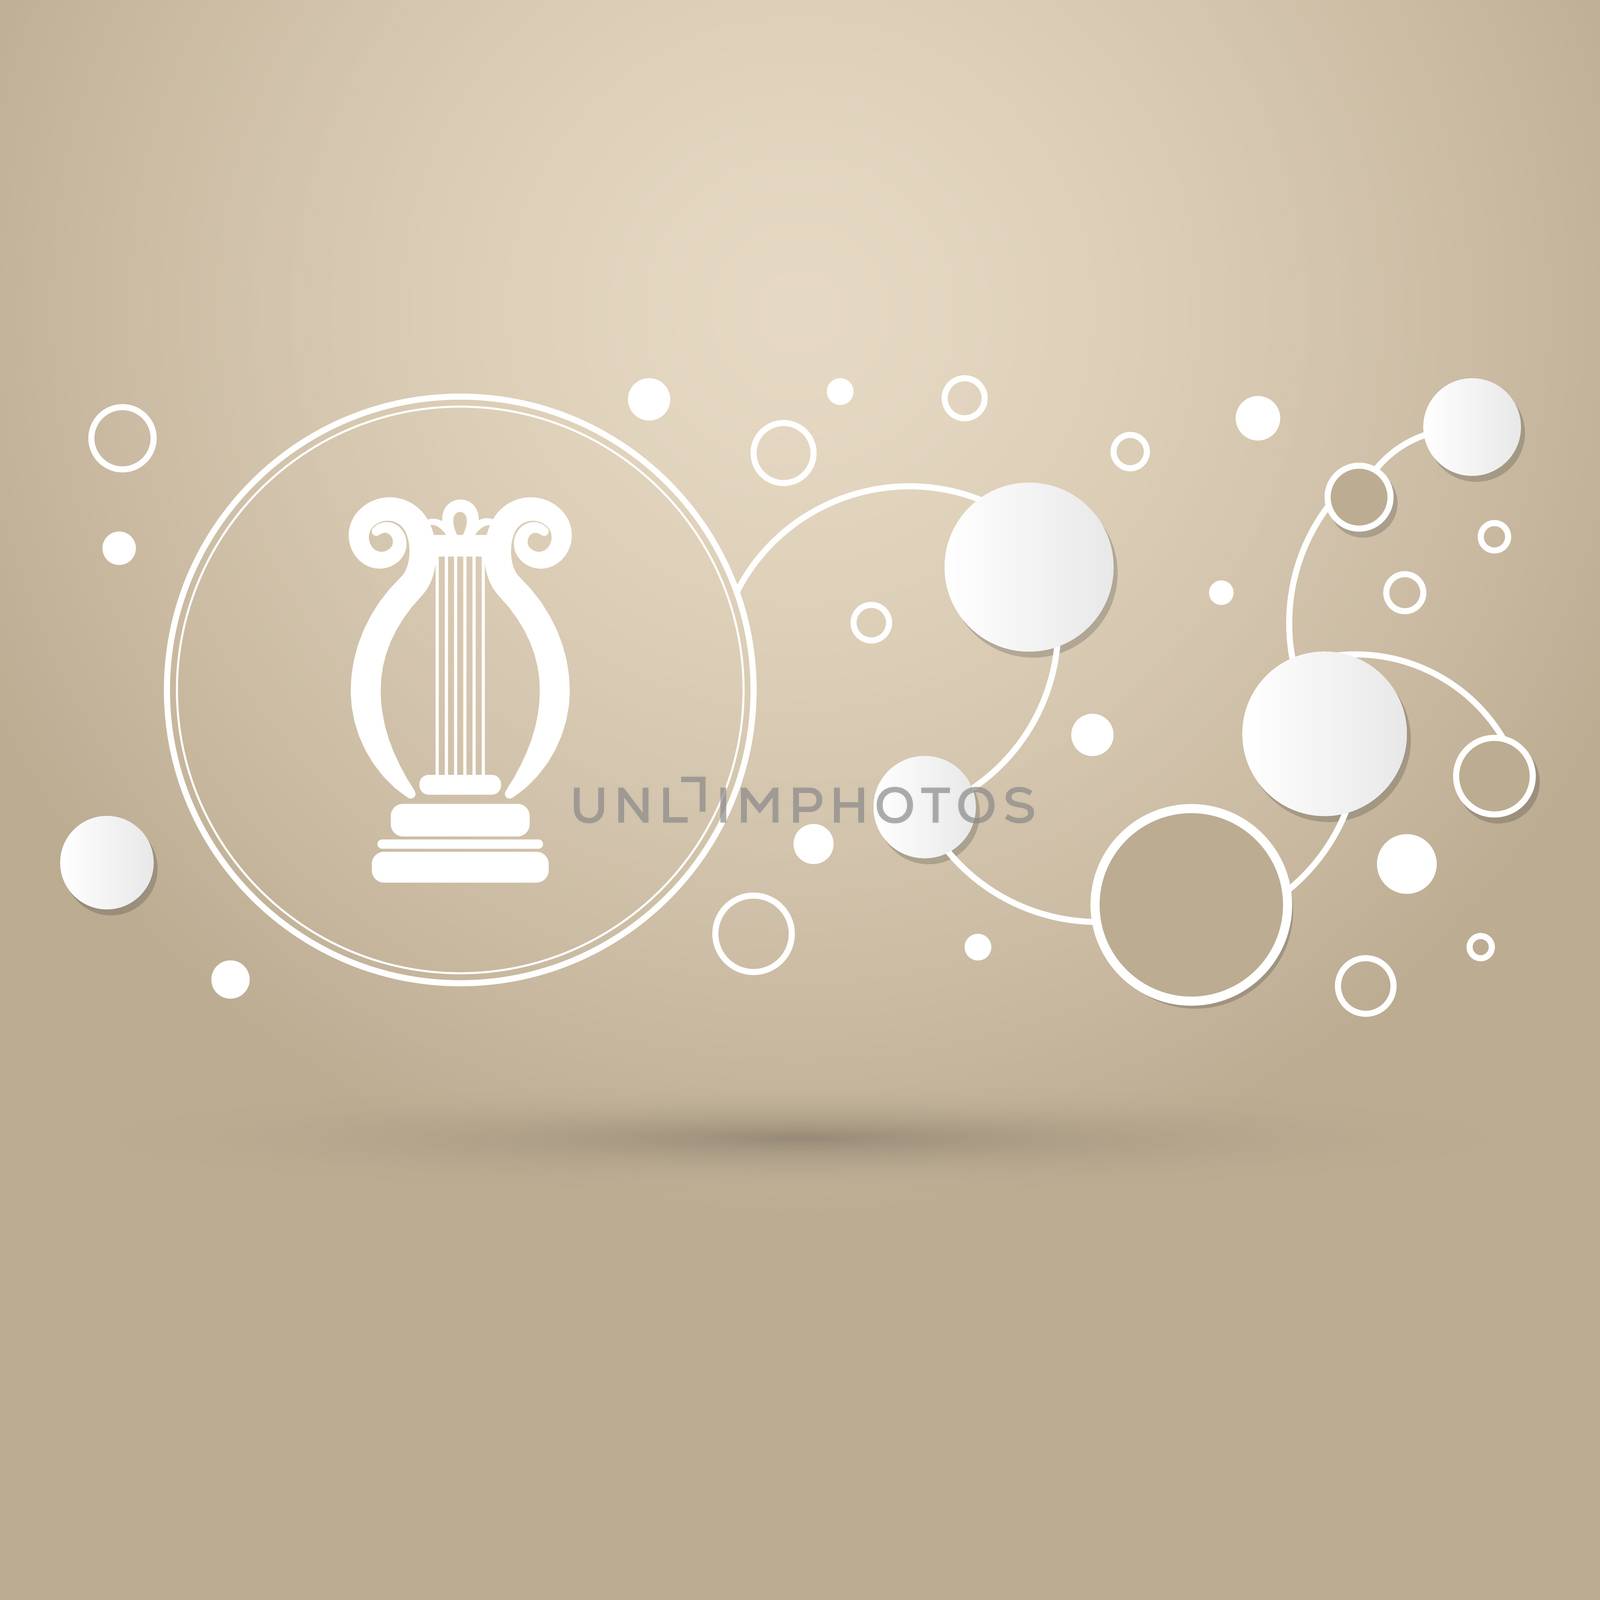 harp icon on a brown background with elegant style and modern design infographic.  by Adamchuk